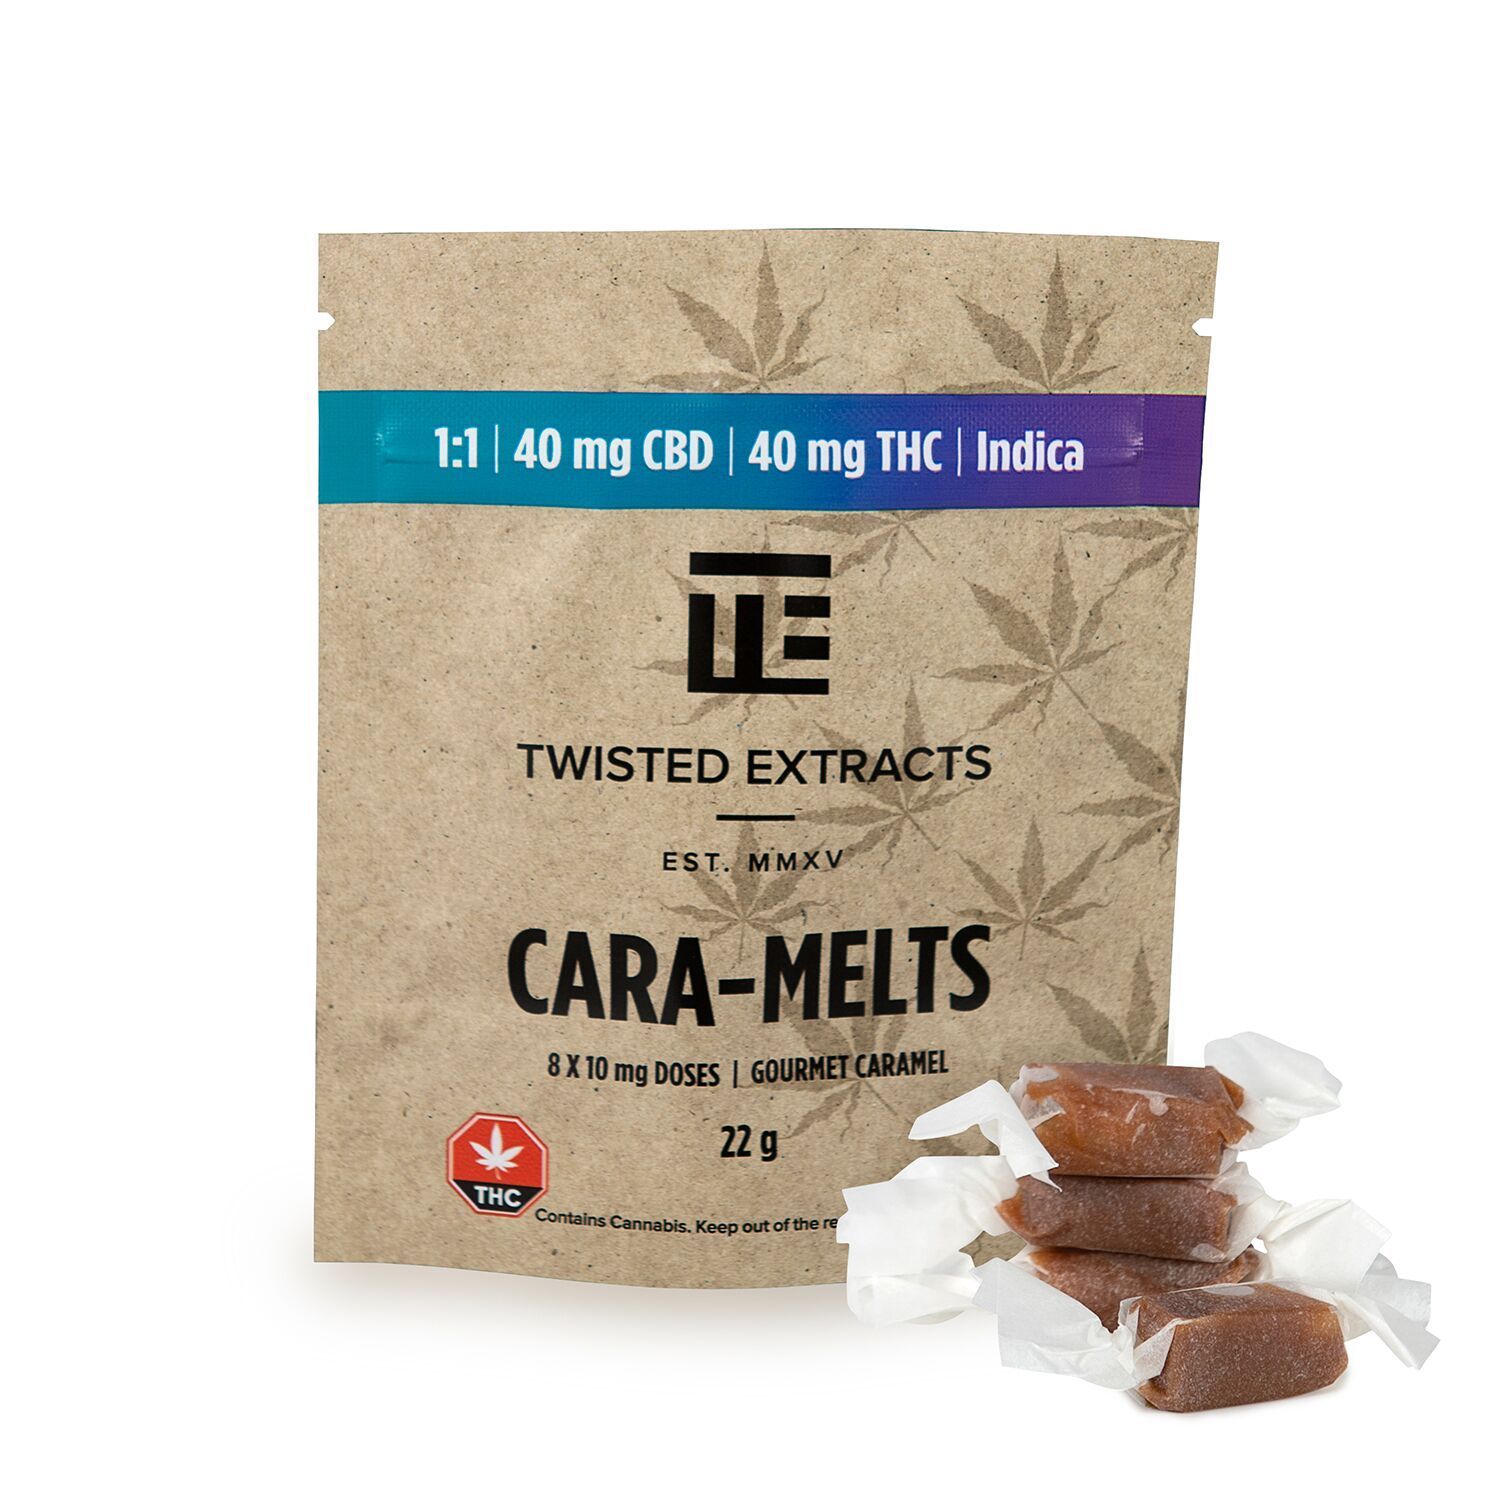 Twisted Extracts CaraMelts - 1:1 CBD / THC 40mg